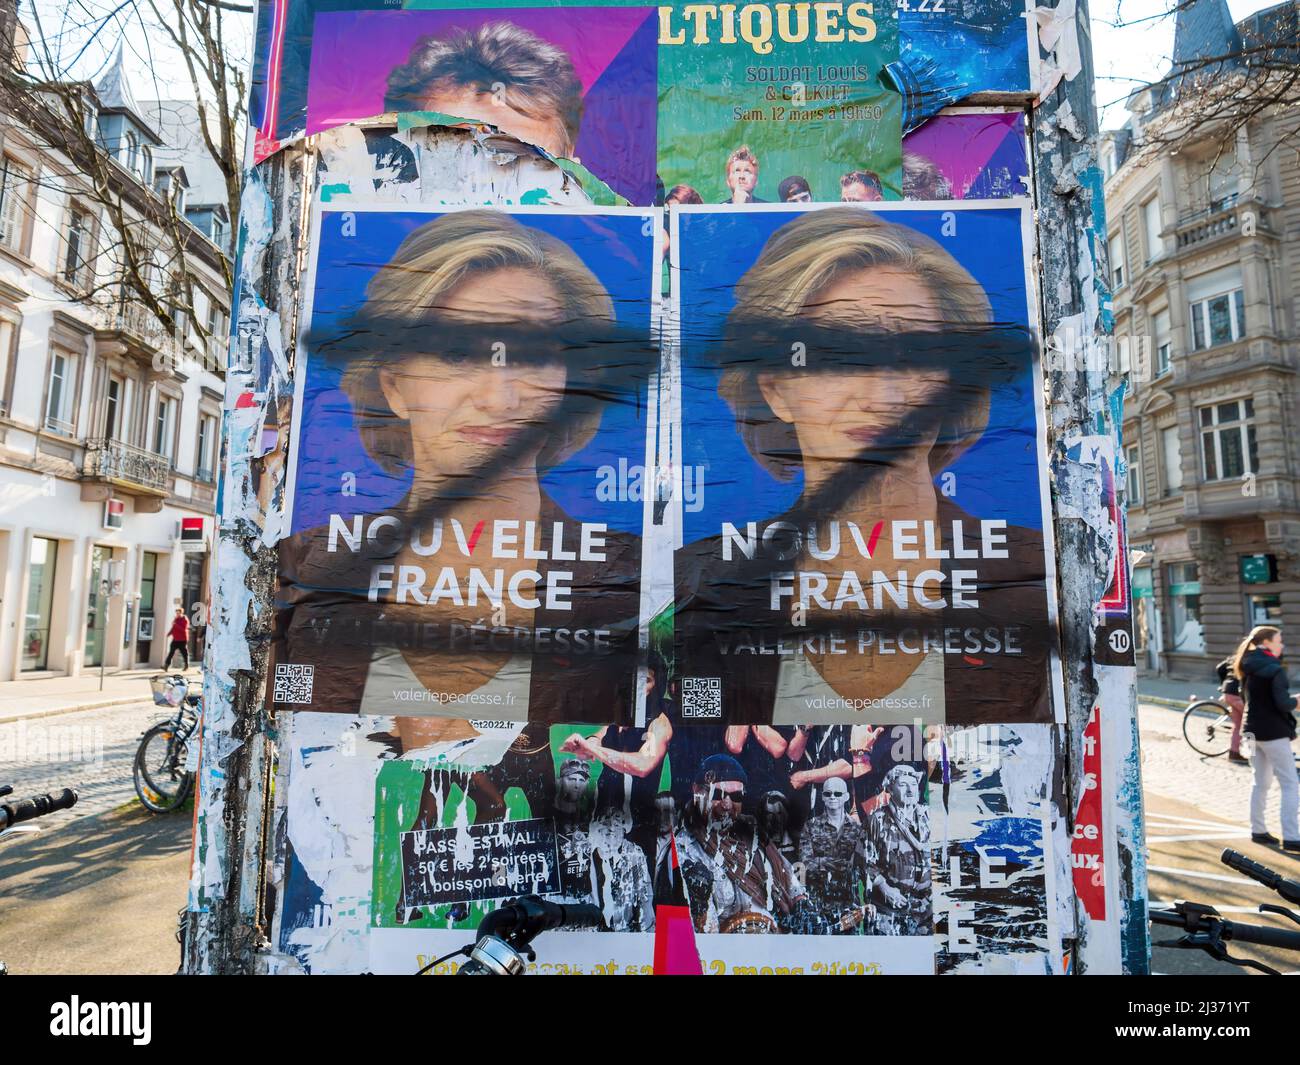 Strasbourg, France - Mar 6, 2022: Z signage in front of political campaing portraits on the Valerie Pecresse from Nouvelle France Stock Photo